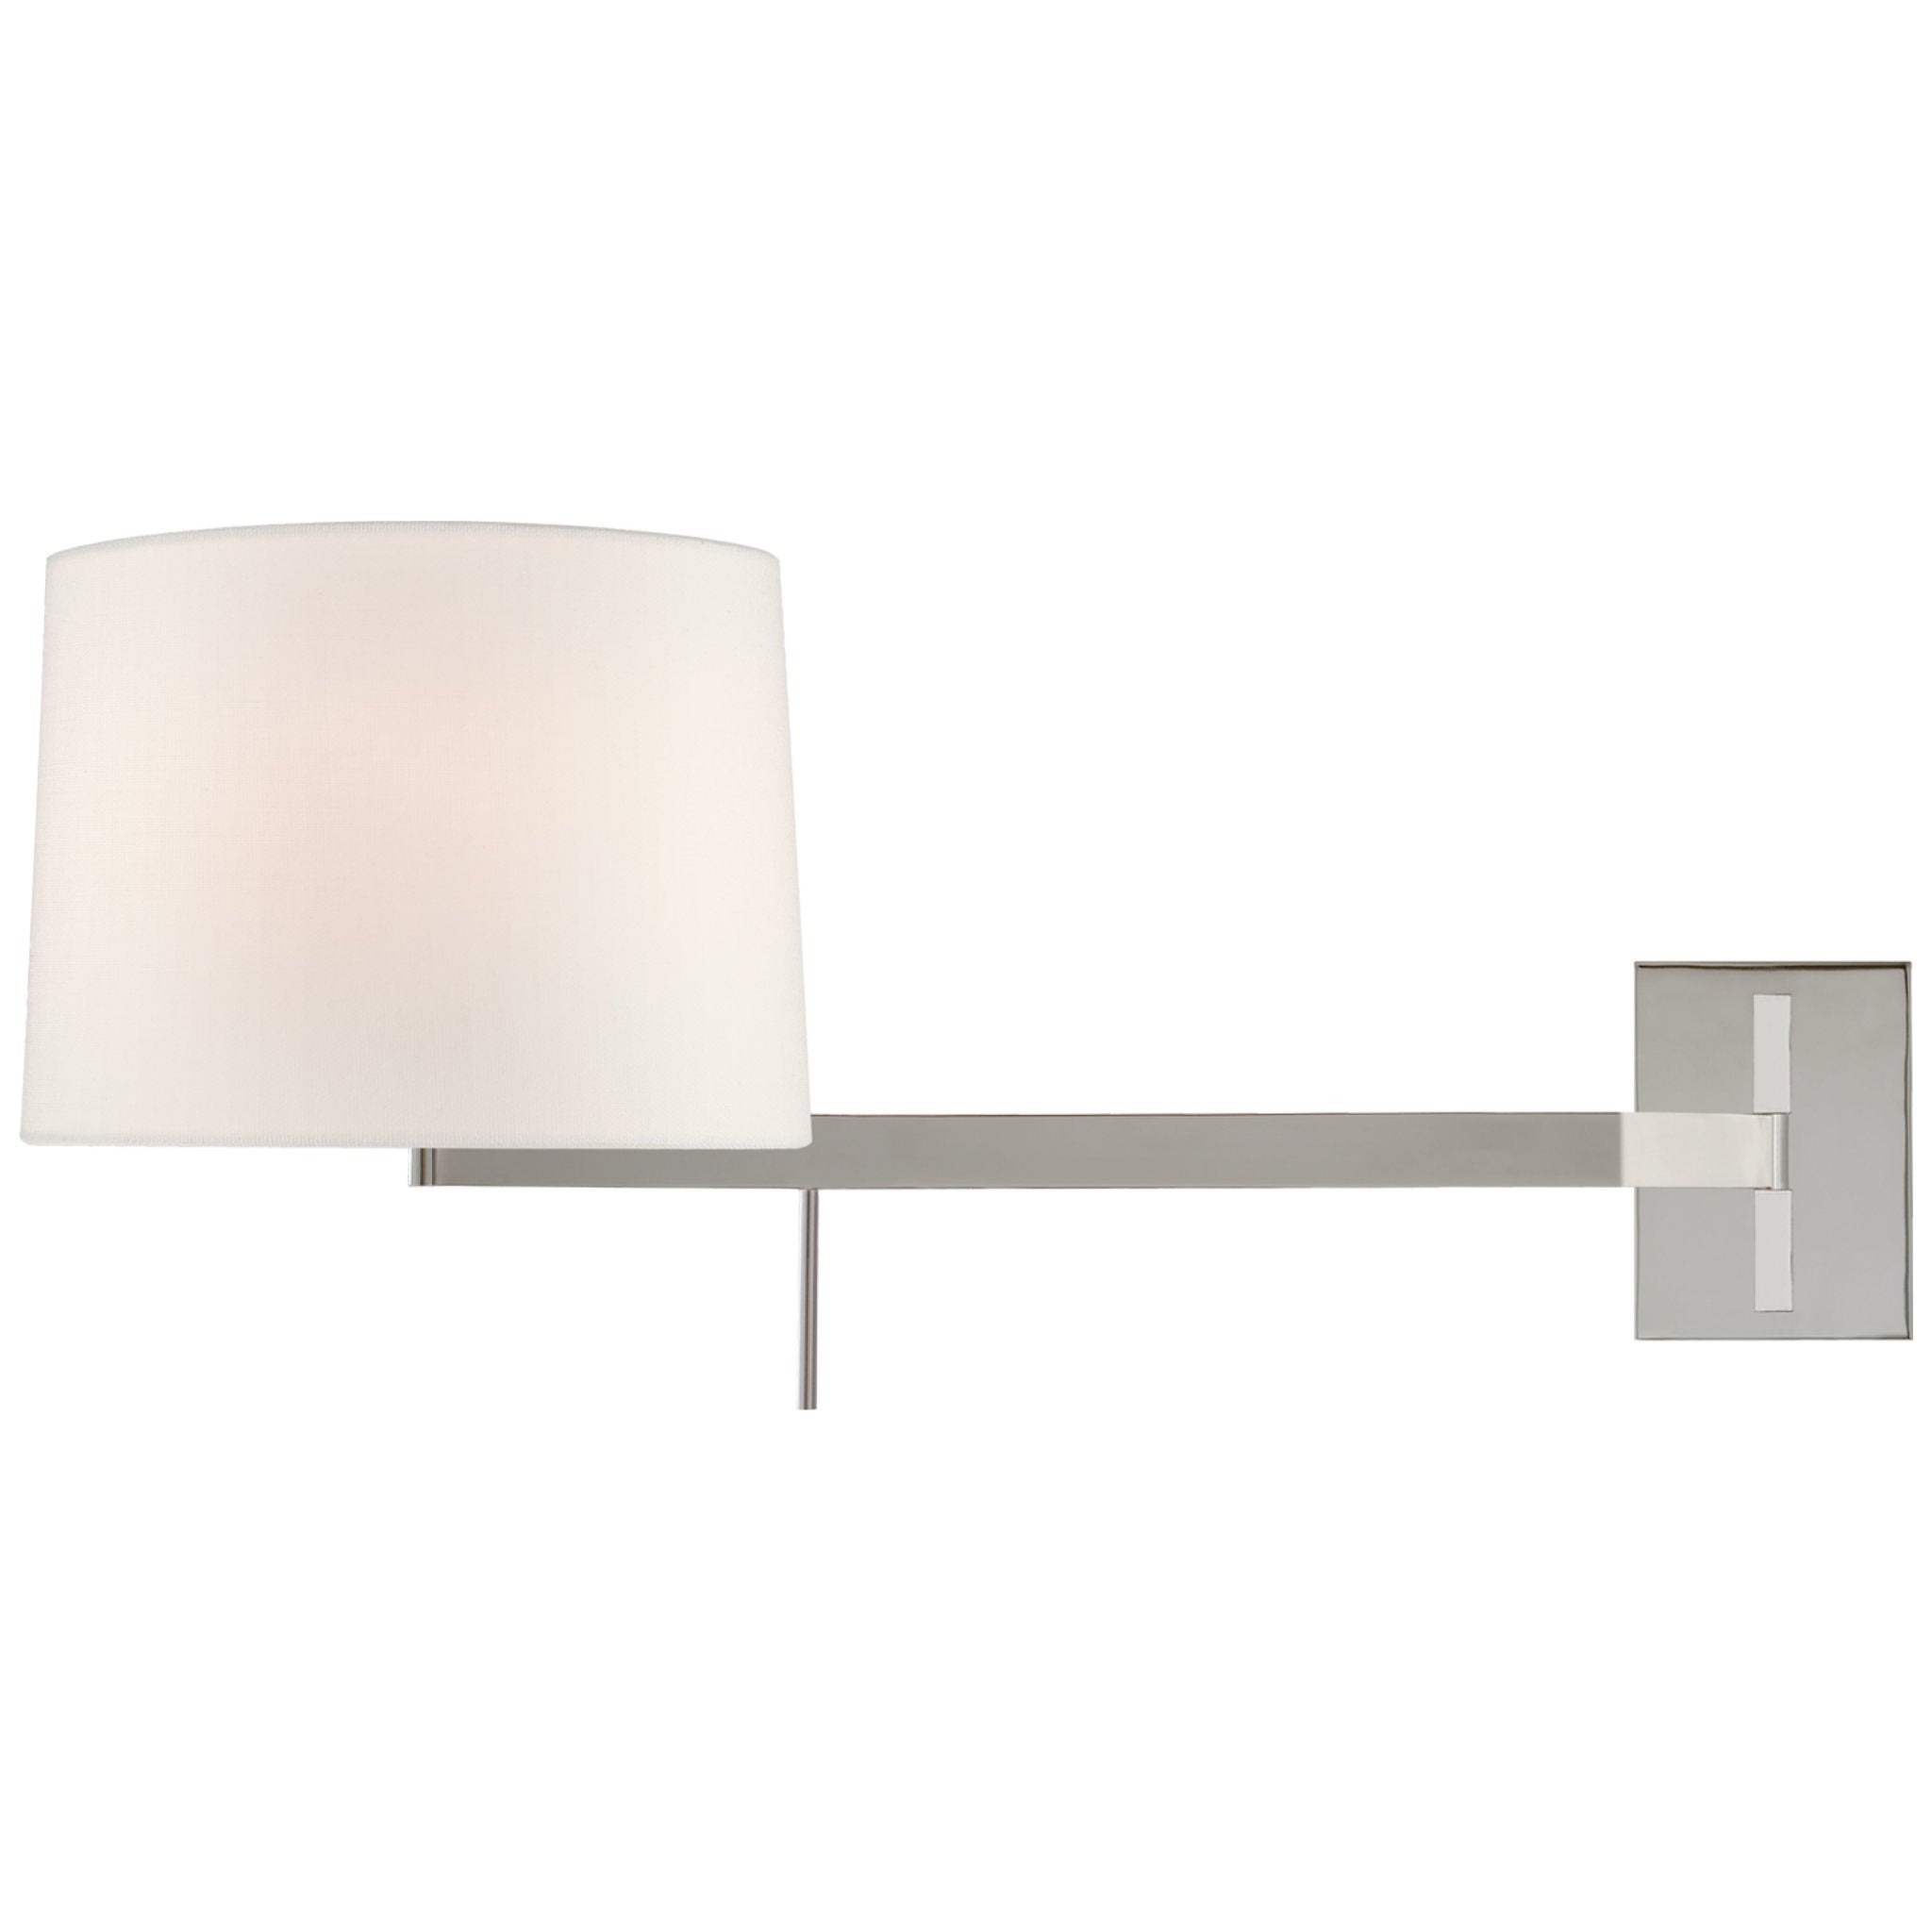 Barbara Barry Sweep Medium Right Articulating Sconce in Polished Nickel with Linen Shade